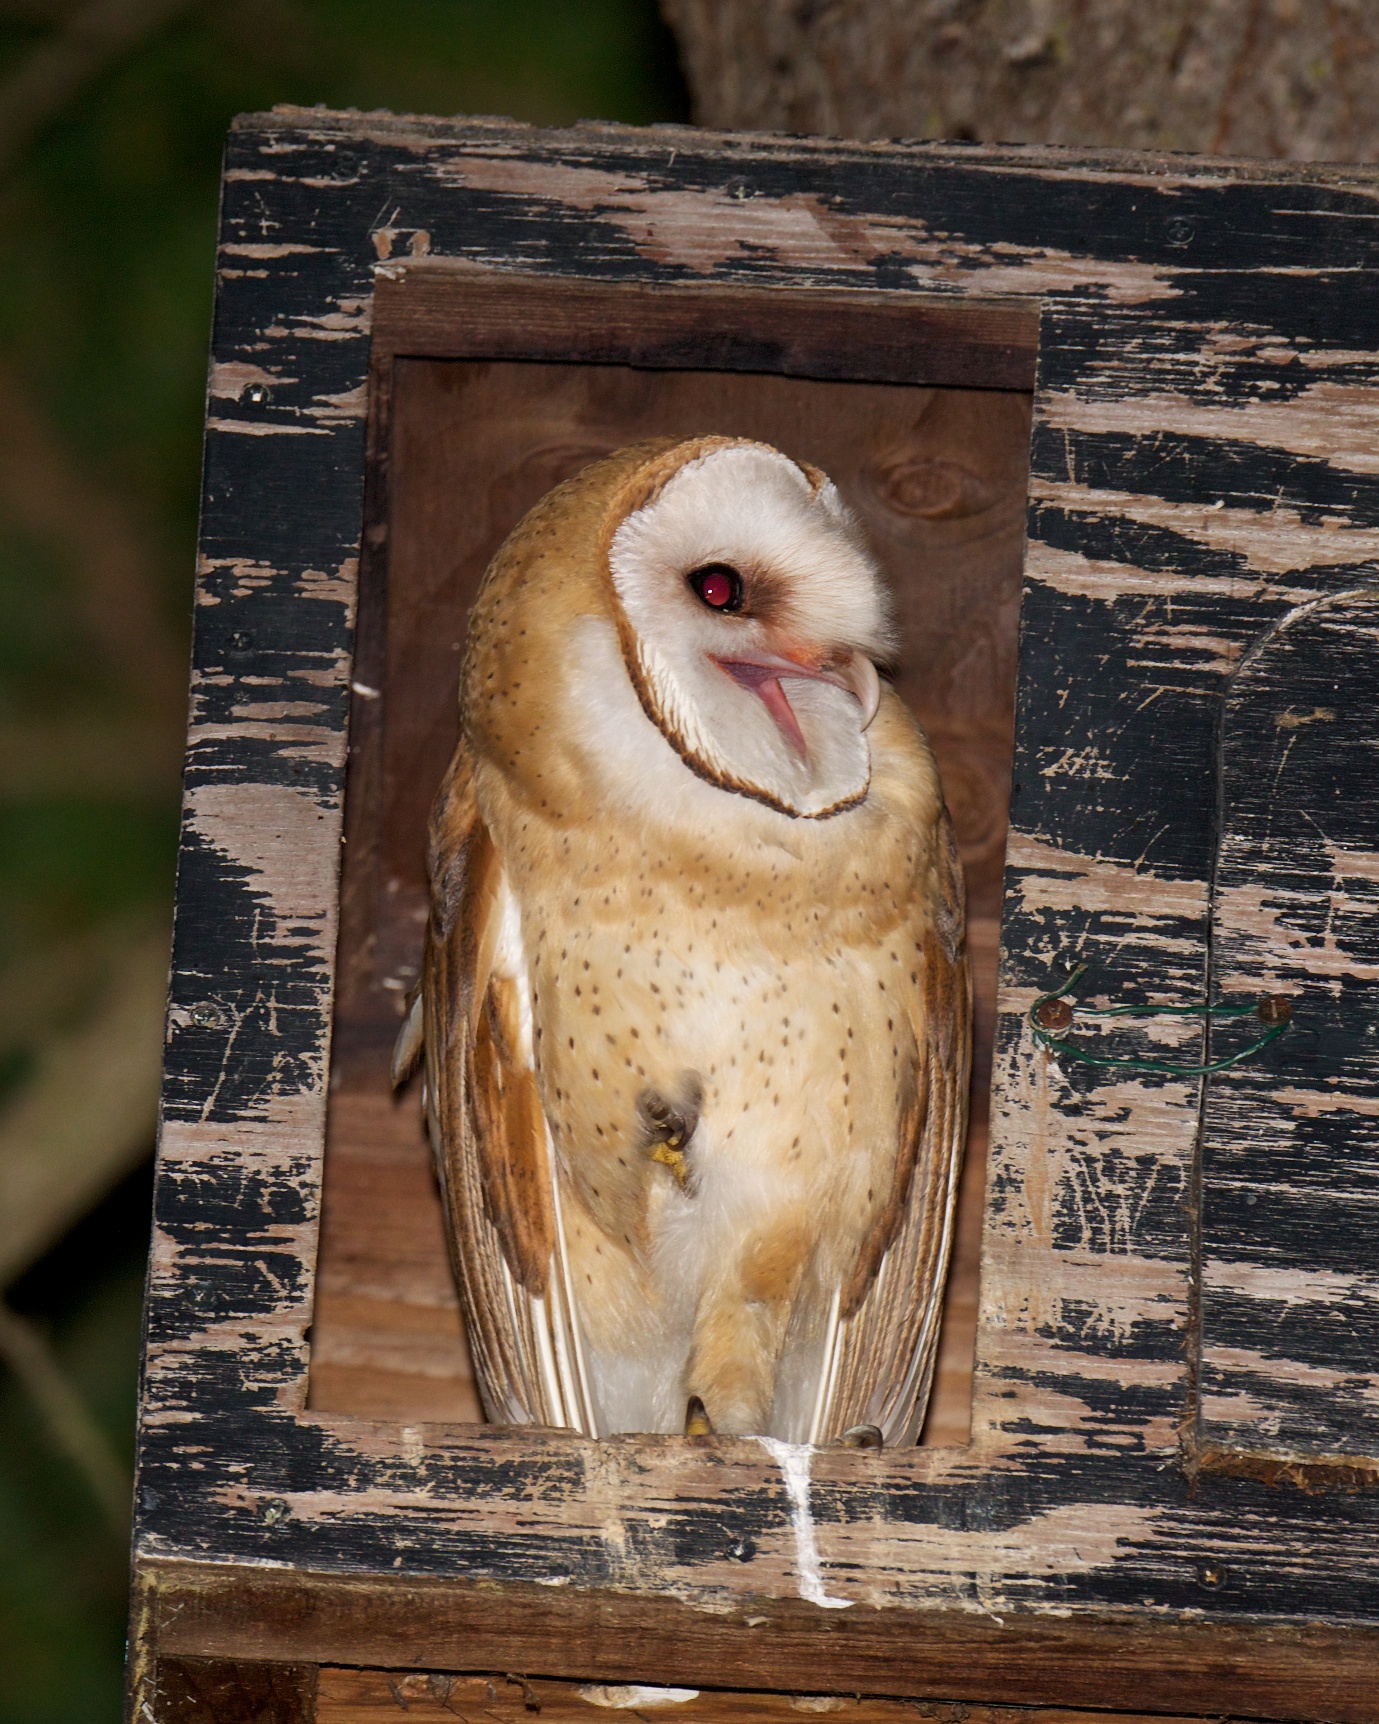 30 HQ Images Sound Of A Barn Owl - Caring for orphaned barn owls | Entertainment | union ...